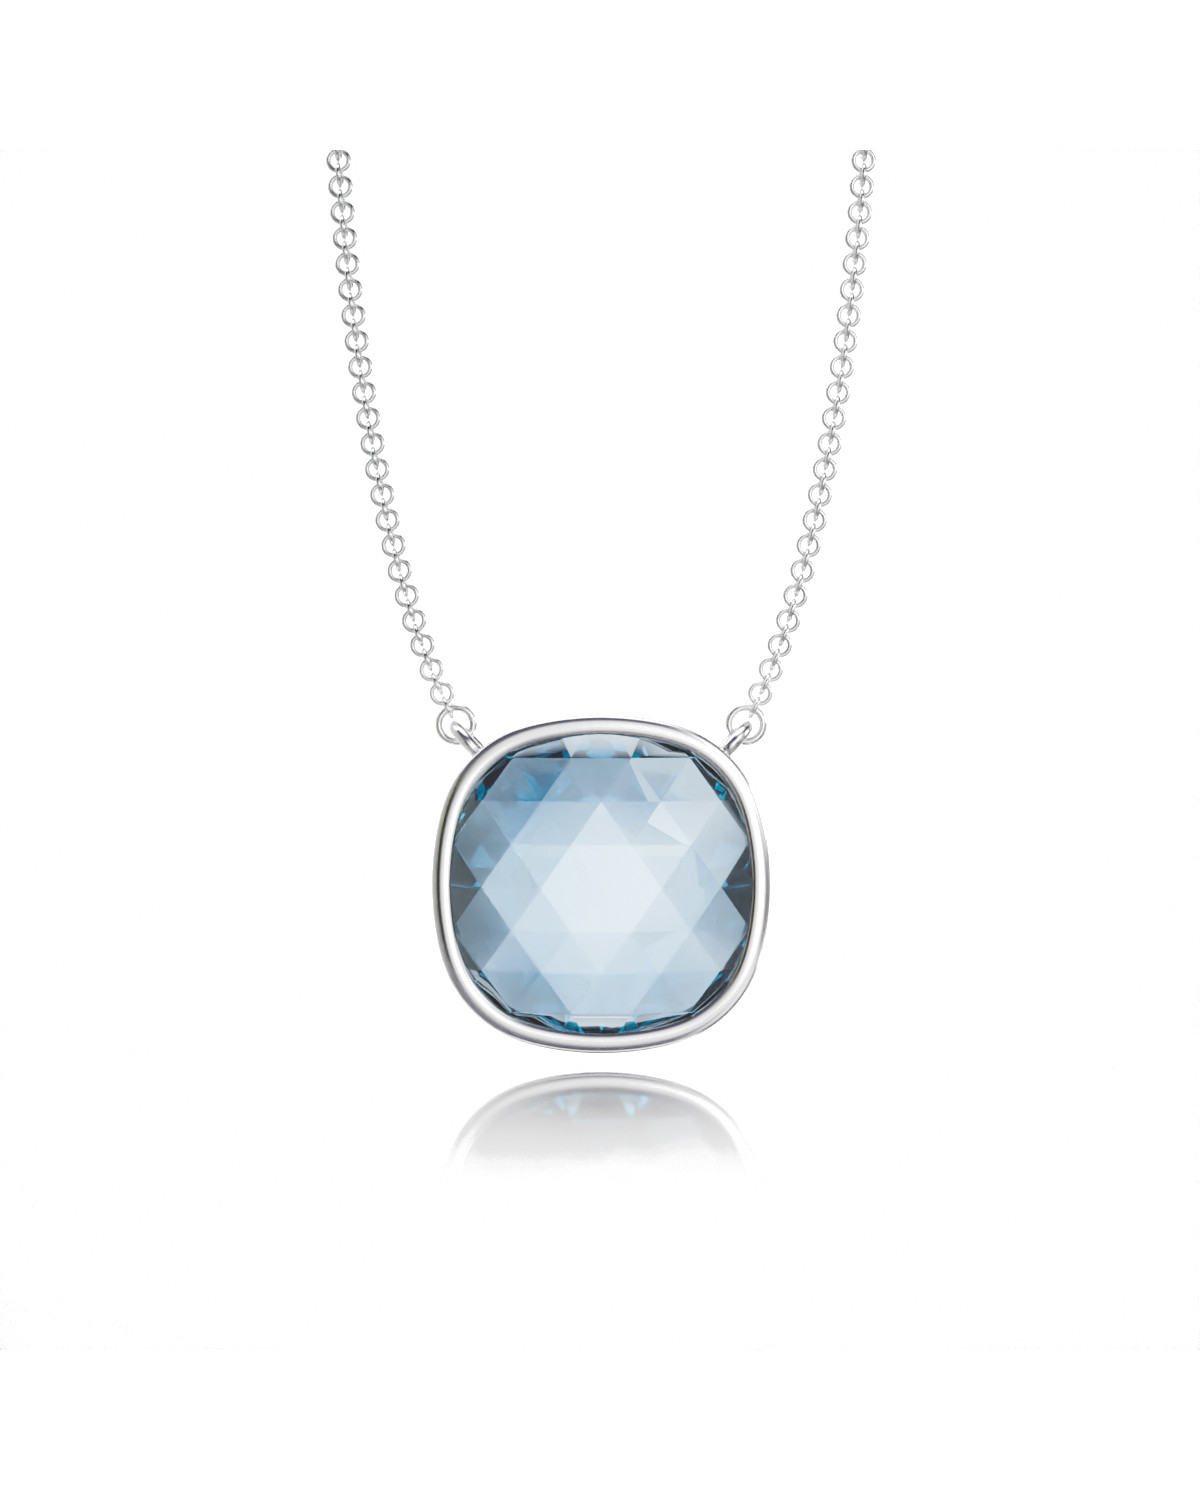 Sky Blue Topaz Necklace Set in Rhodium-plated 925 Silver